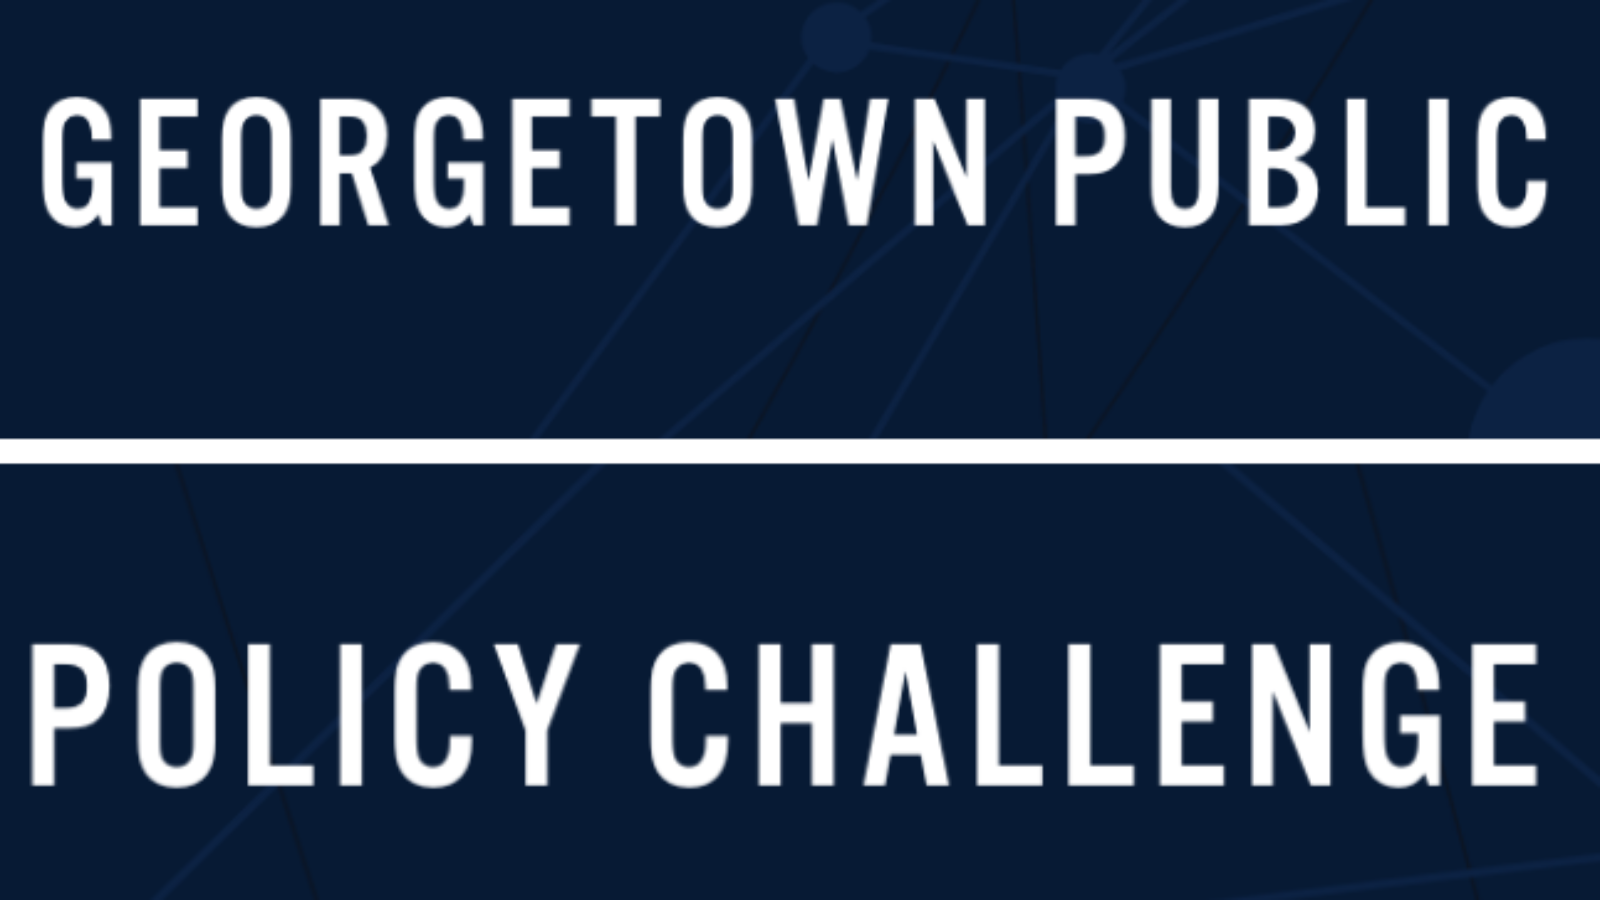 Georgetown Public Policy Challenge